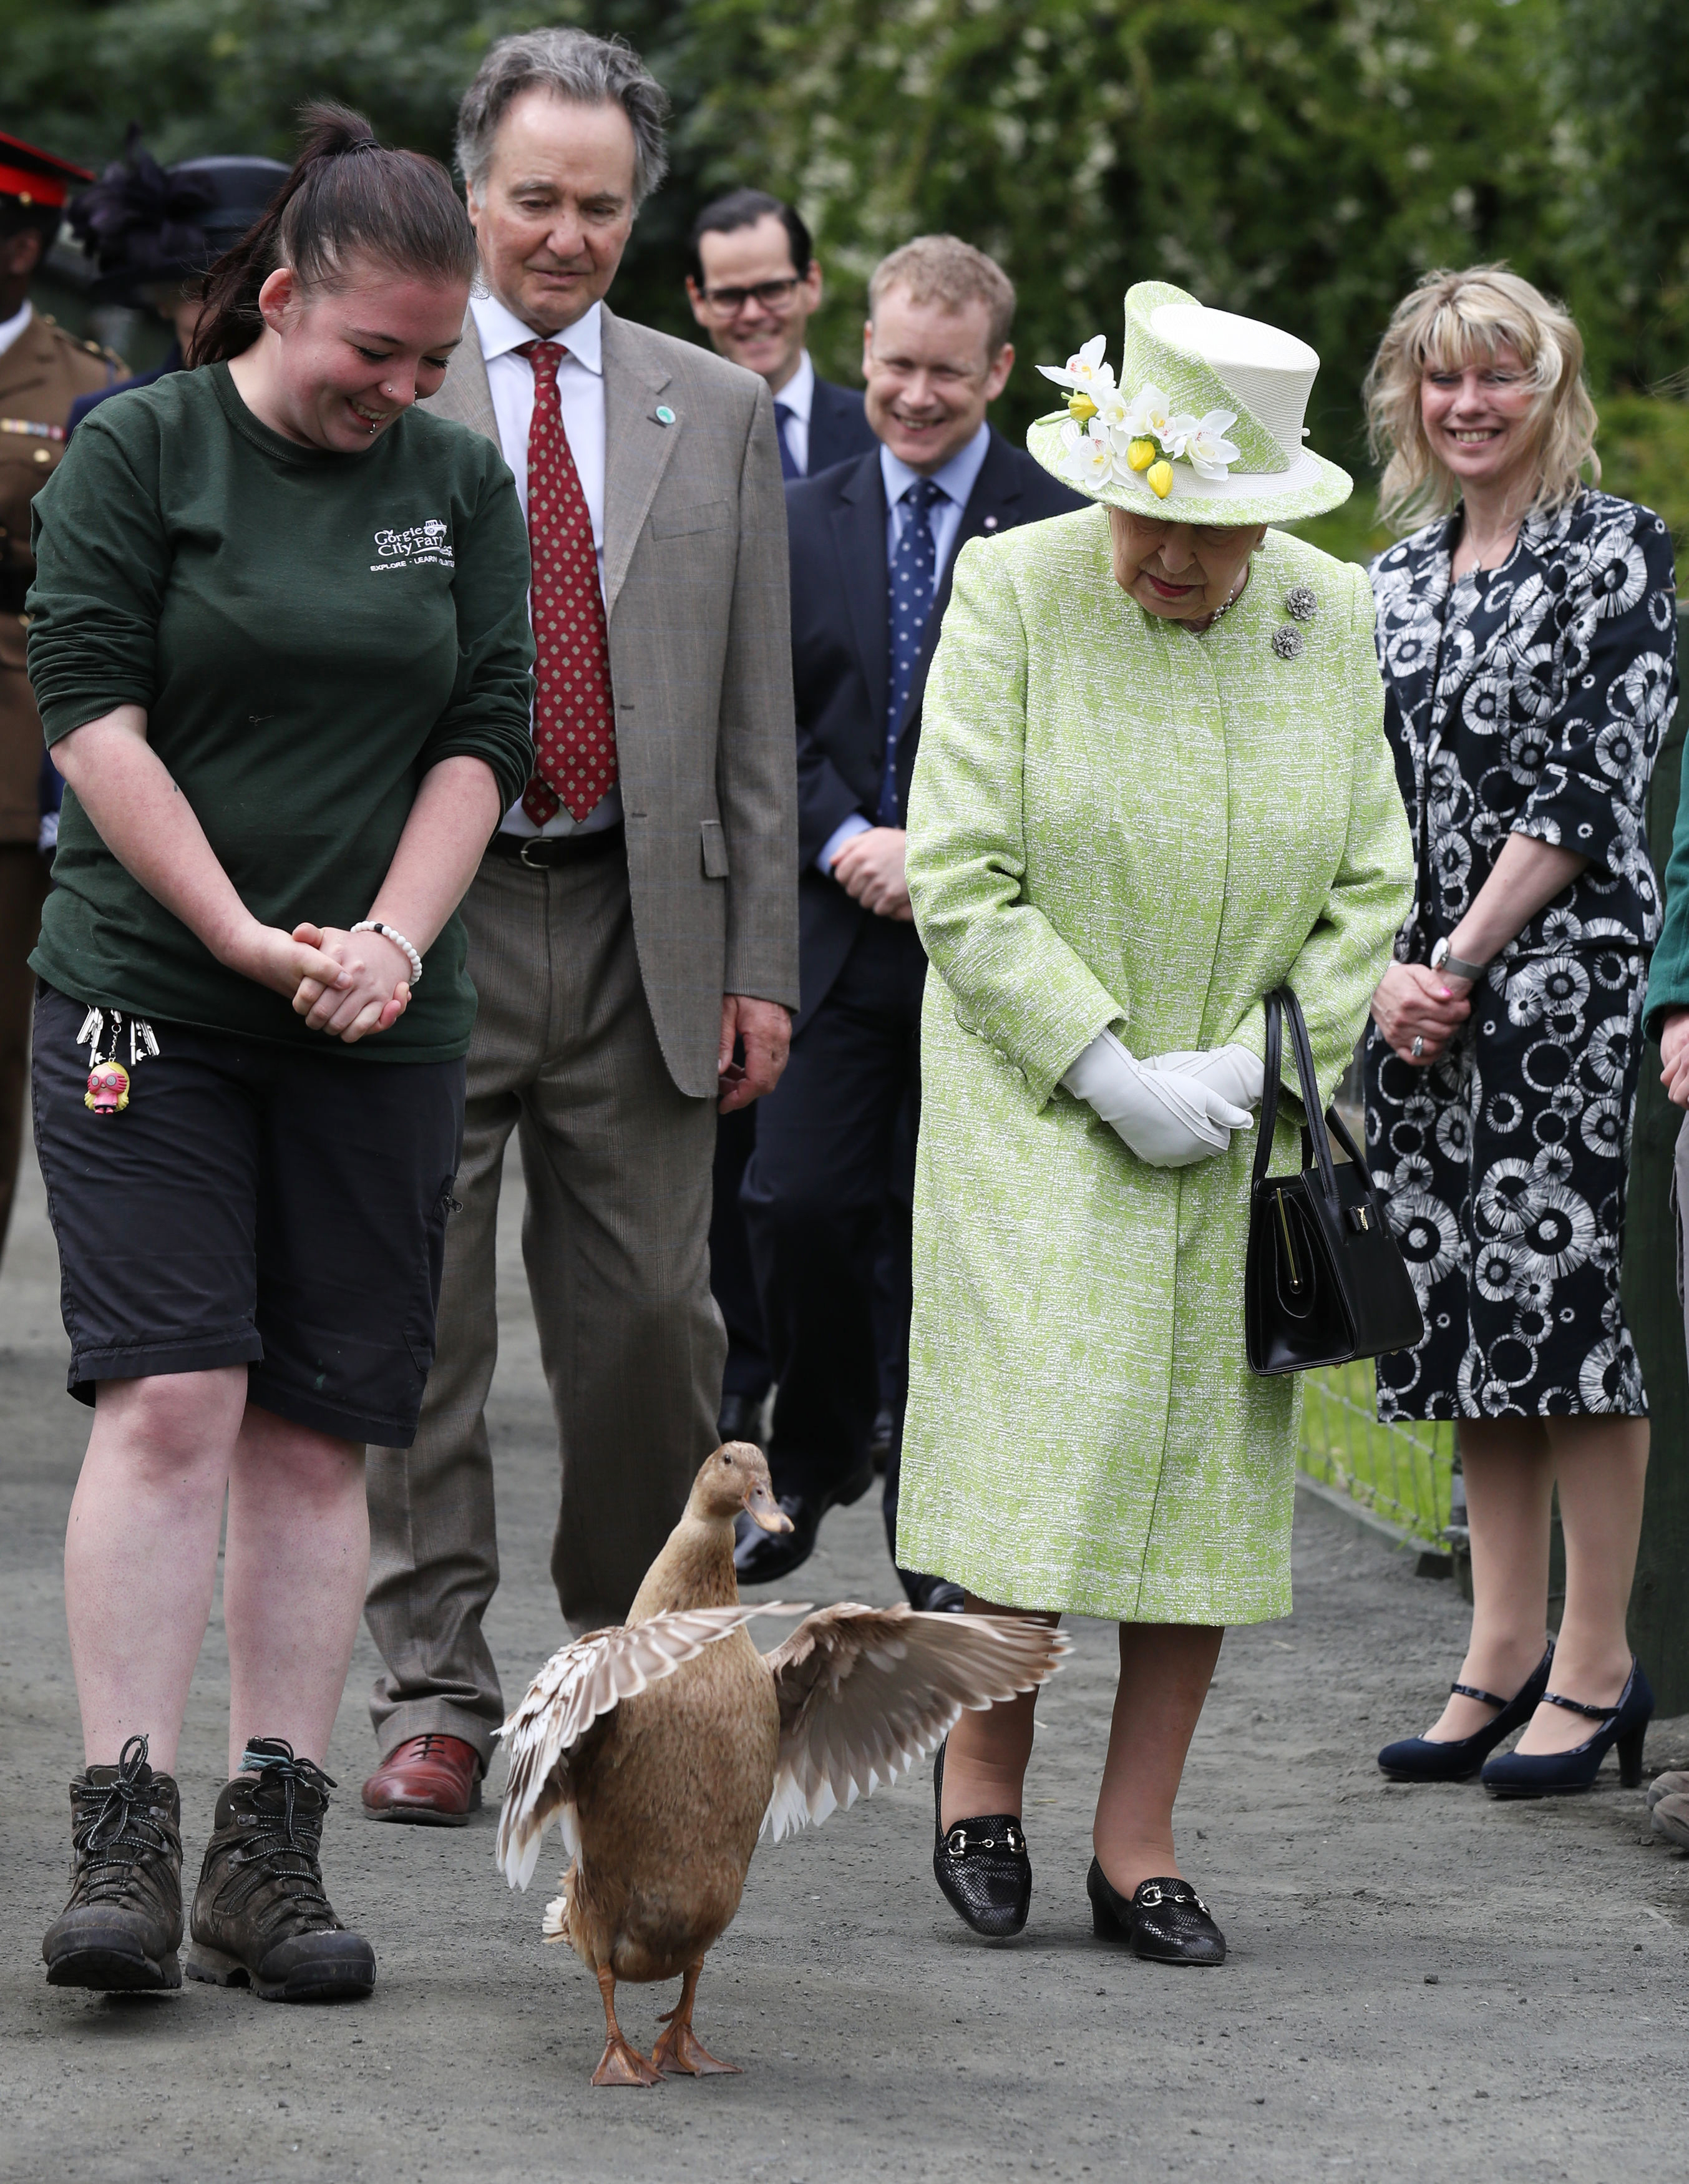 <p>Queen Elizabeth II chatted with keeper Maia Gordon as Olive the duck walked alongside them during a visit to Gorgie City Farm in Edinburgh, Scotland, on July 4, 2019.</p>